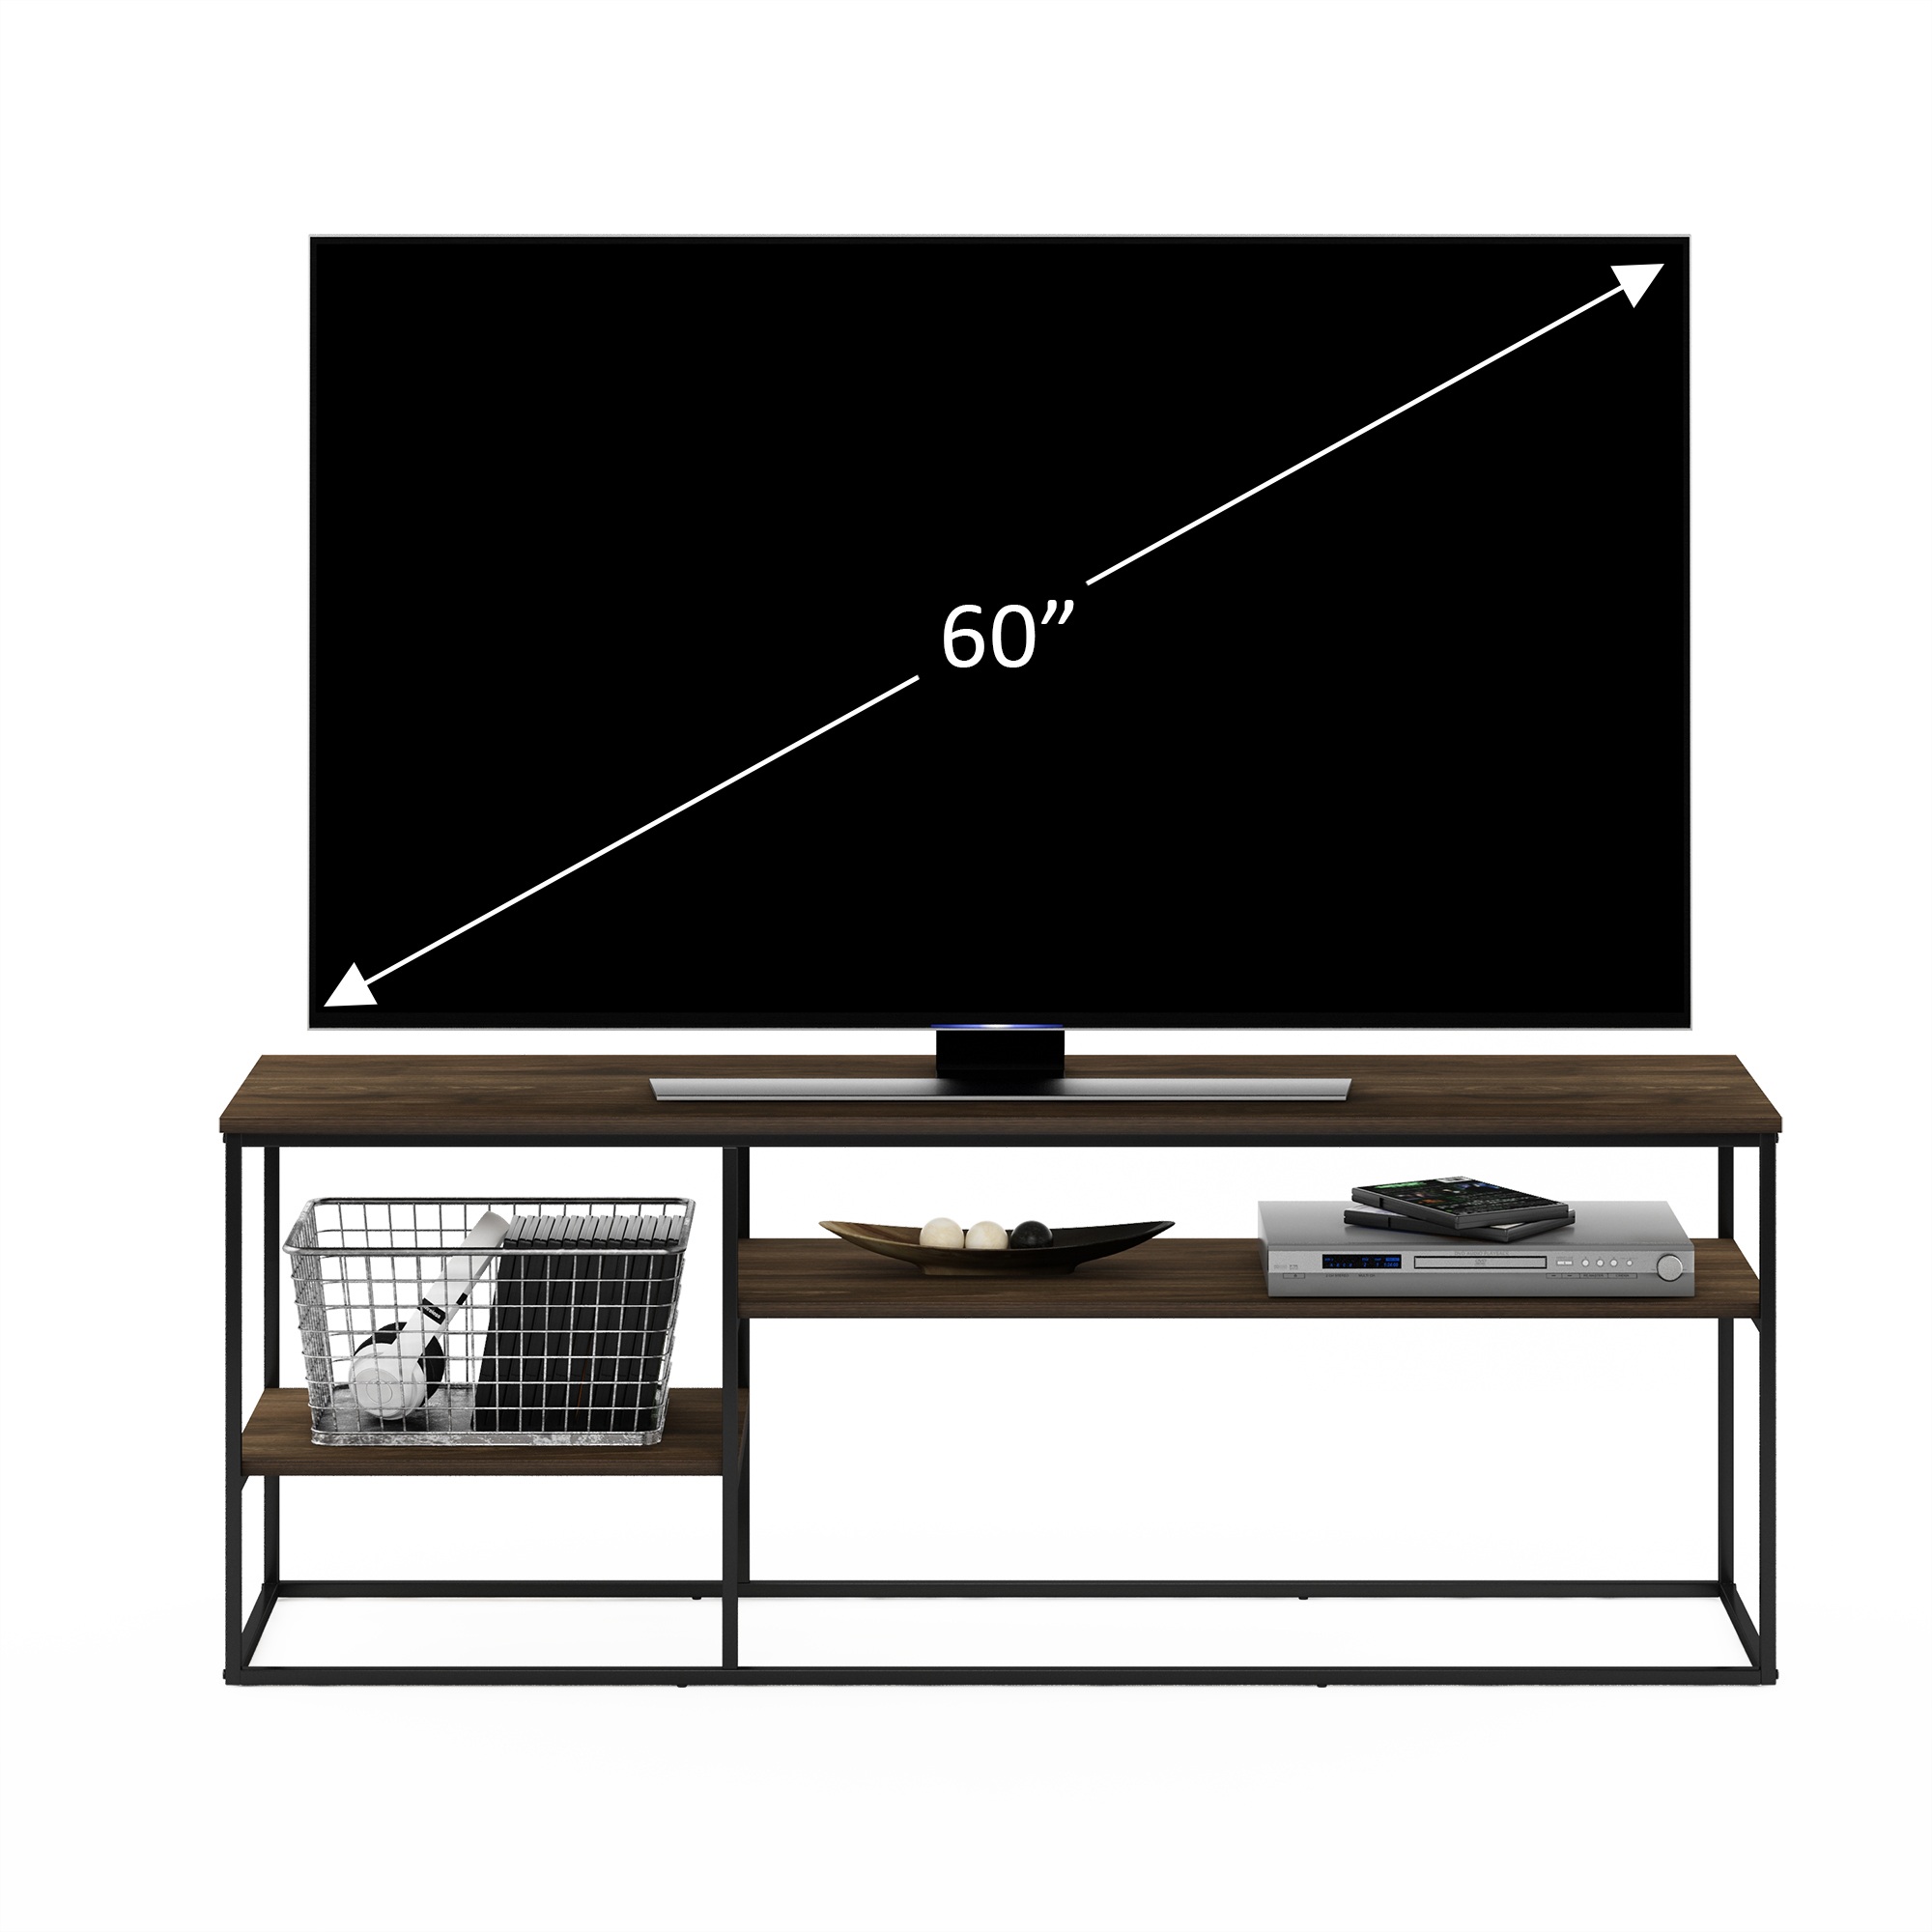 Furinno Moretti Modern Lifestyle TV Stand for TV up to 65 Inch, Columbia Walnut